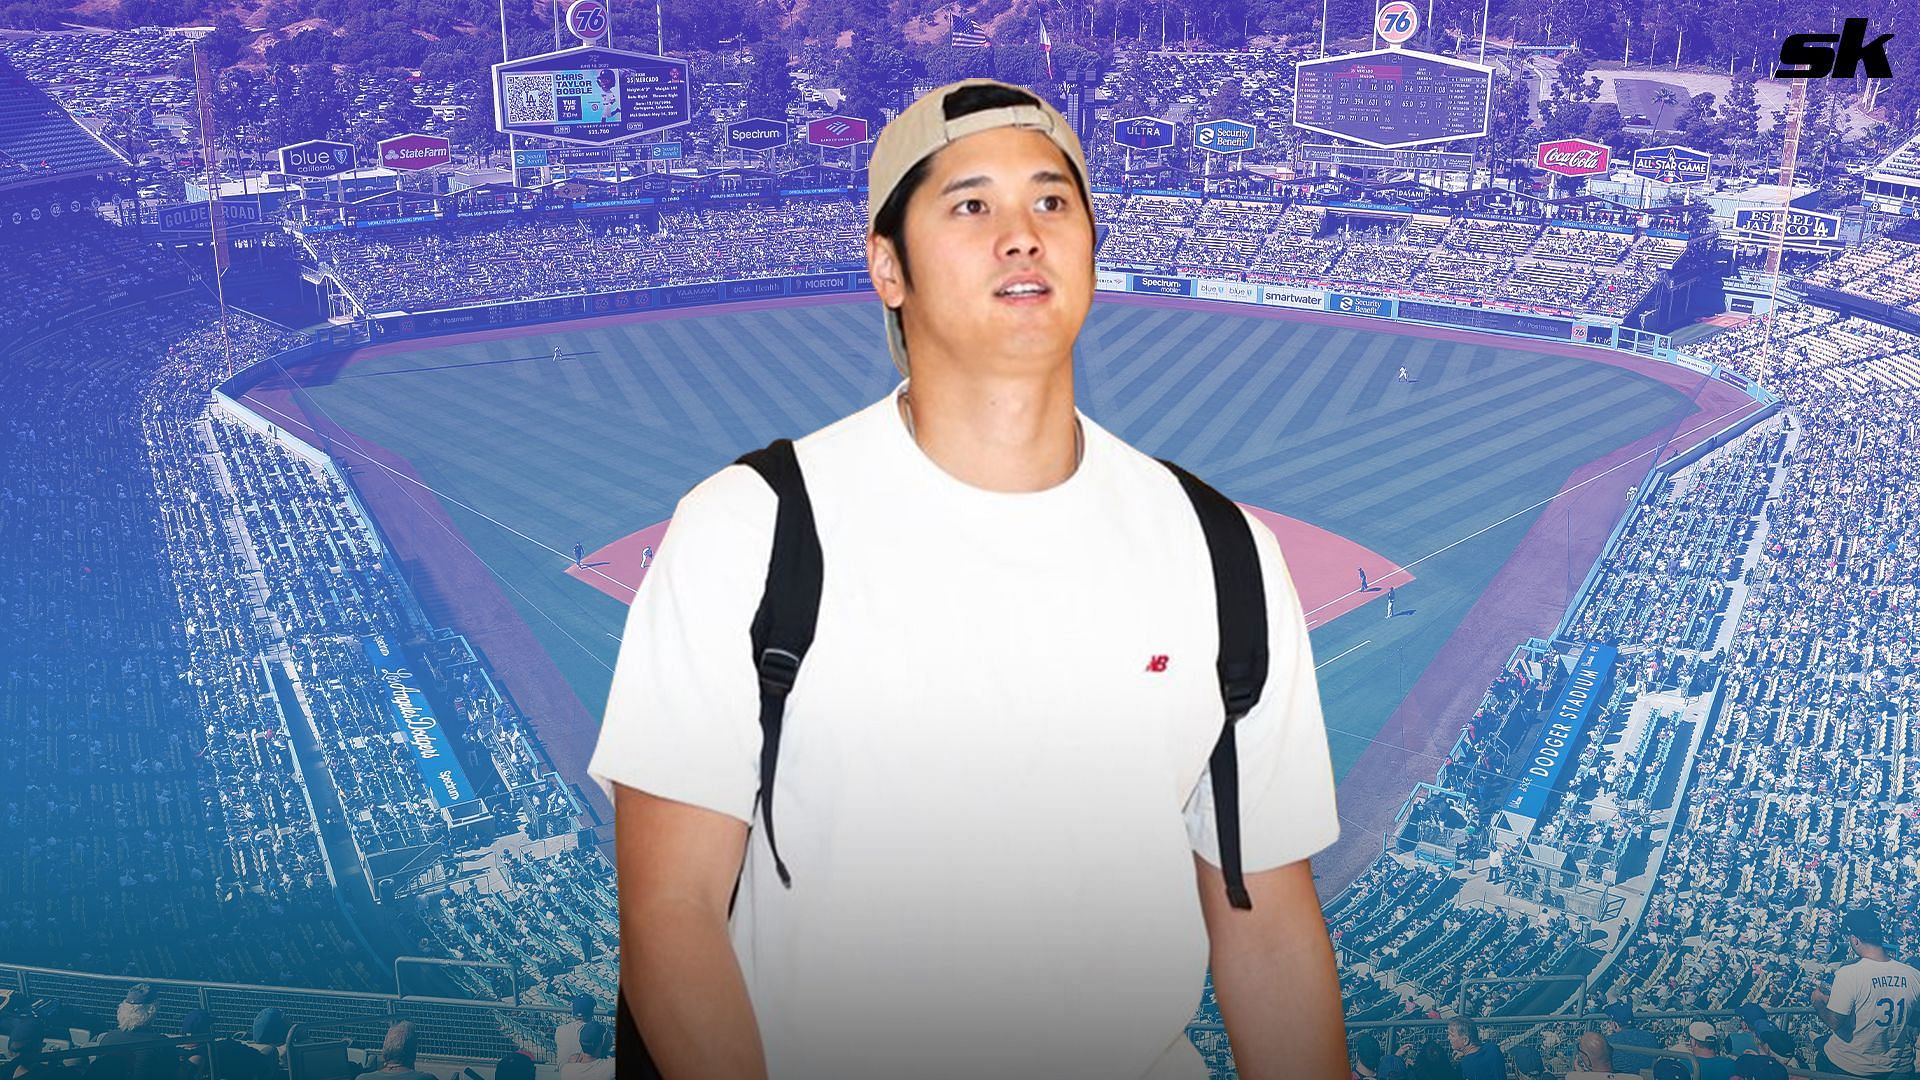 Shohei Ohtani graces Dodger Stadium for Opening Day amid recent allegations